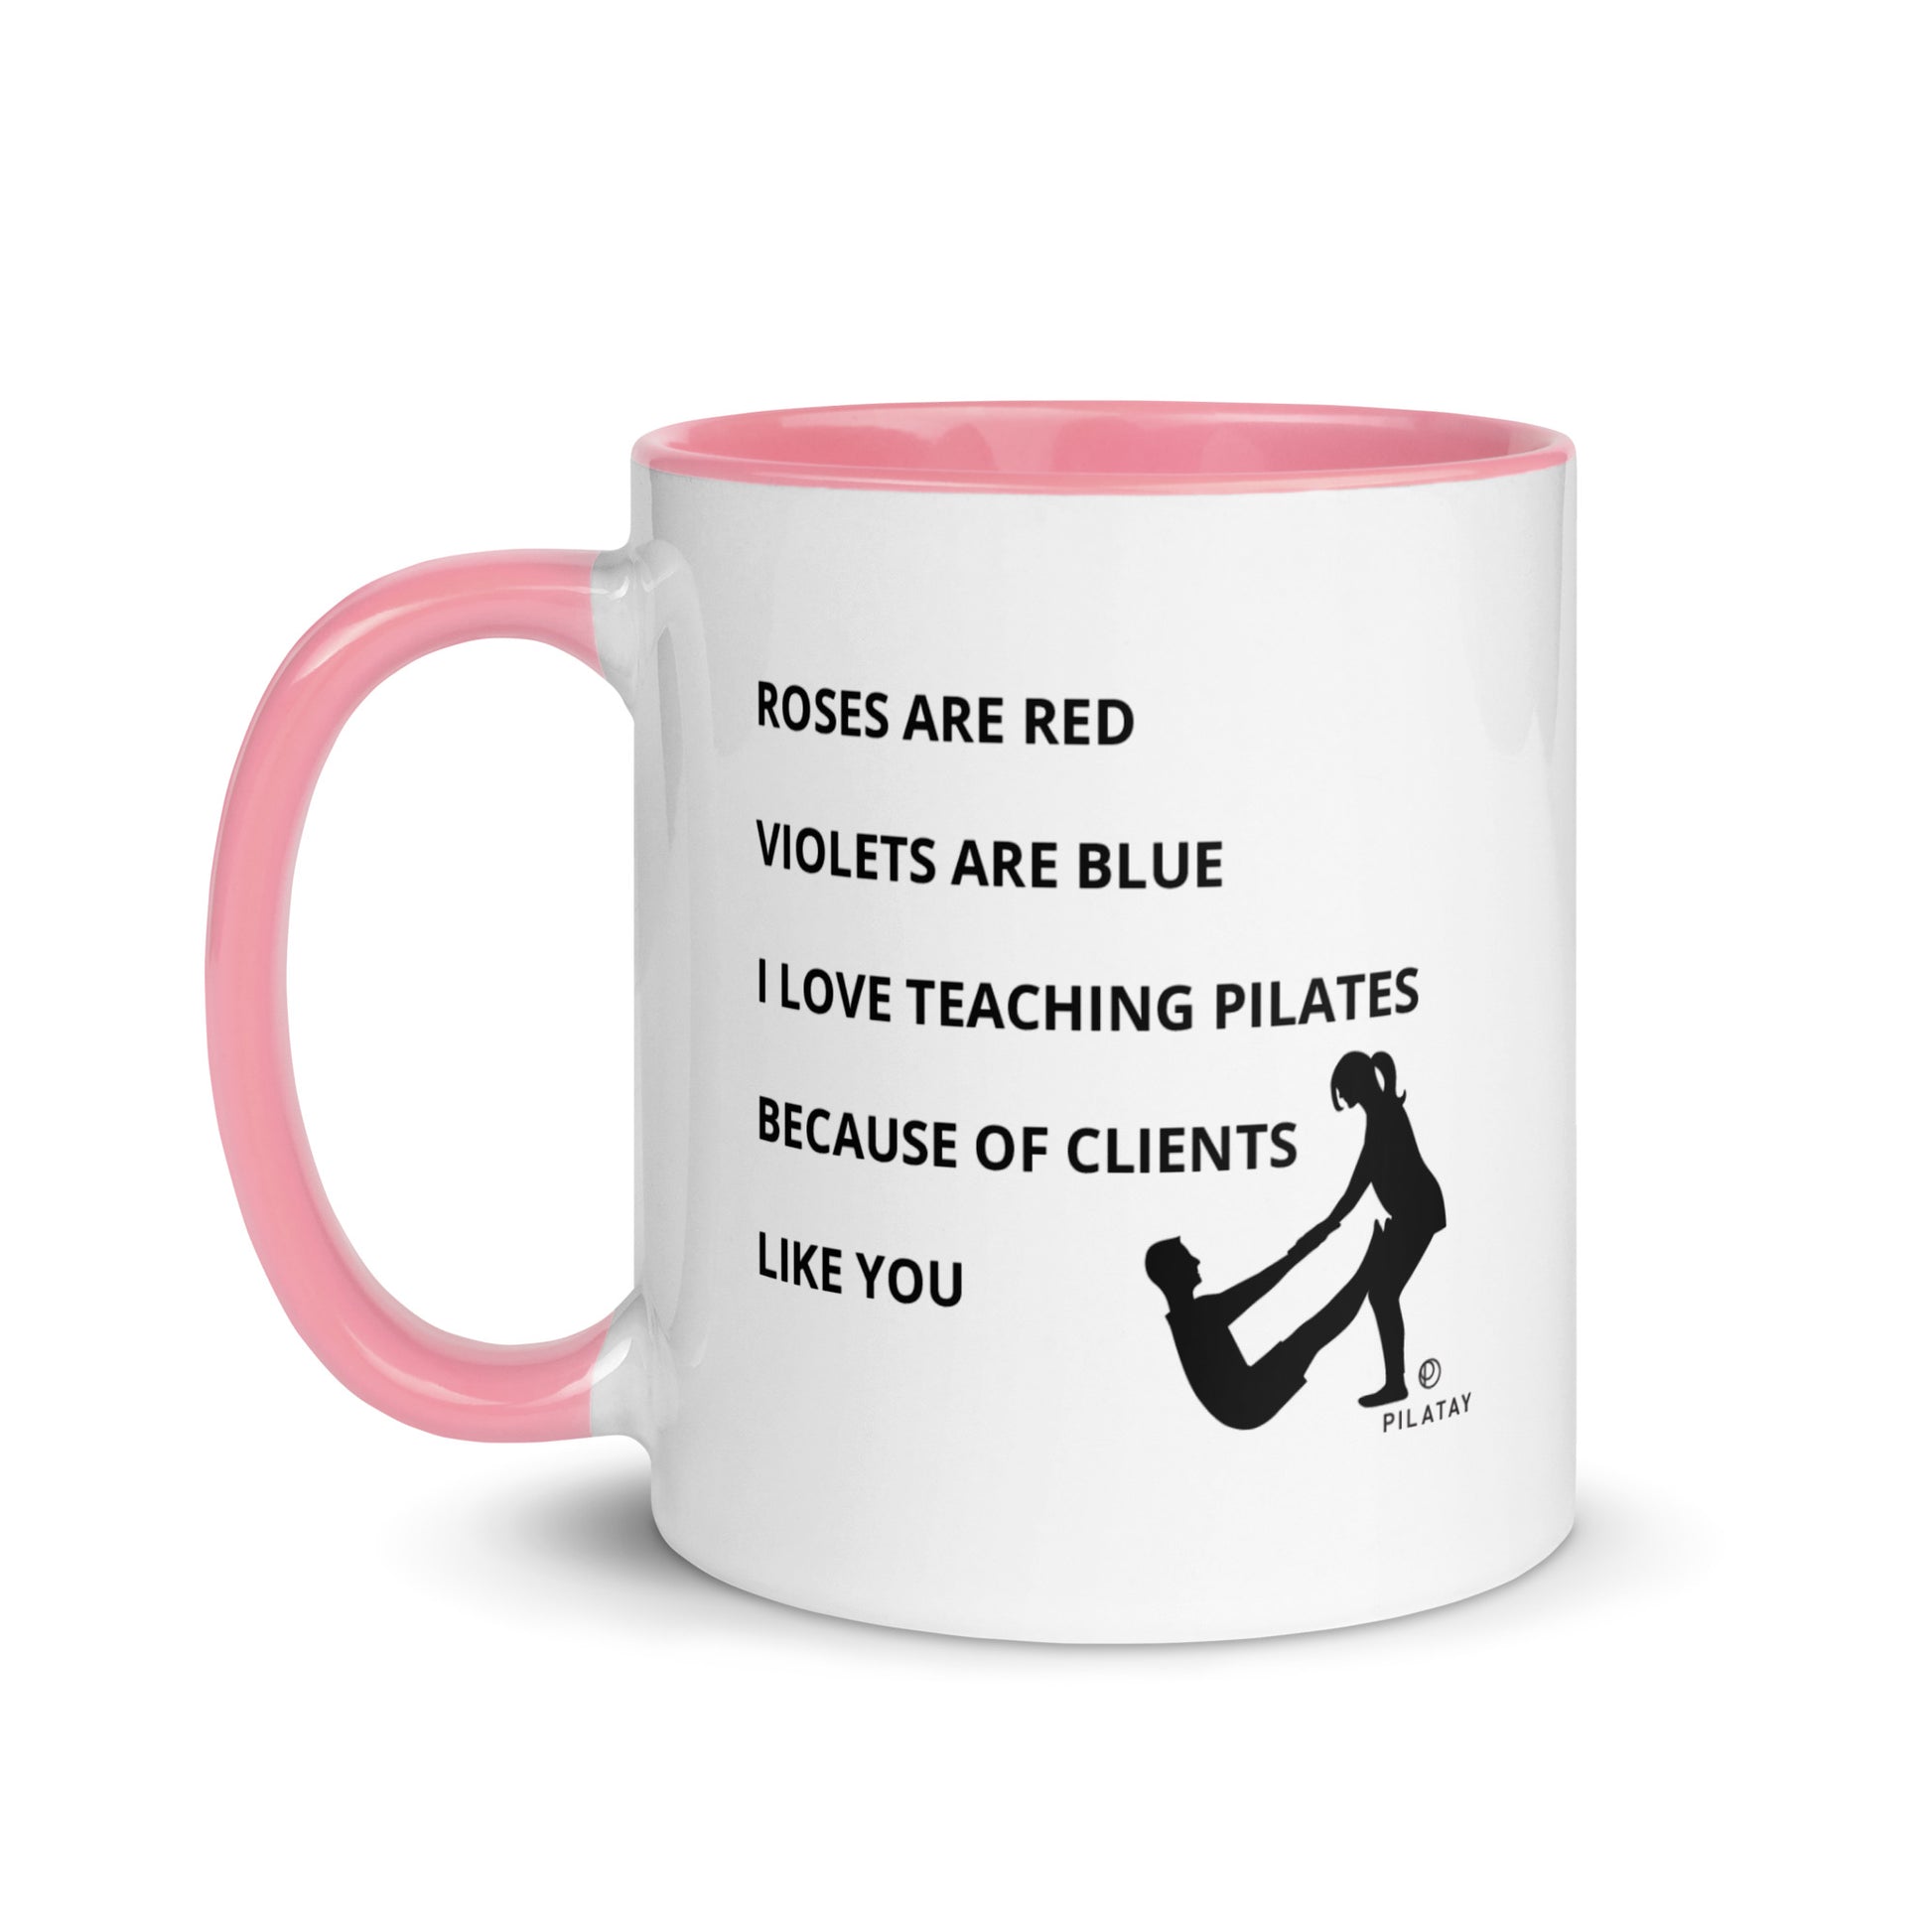 Pilates Coffee Mug - Gifts from Pilates teachers - Roses are red violets are blue I love teaching Pilates because of clients like you - featuring an image of a Pilates teacher assisting a Pilates client with Joseph Pilates teaser exercise